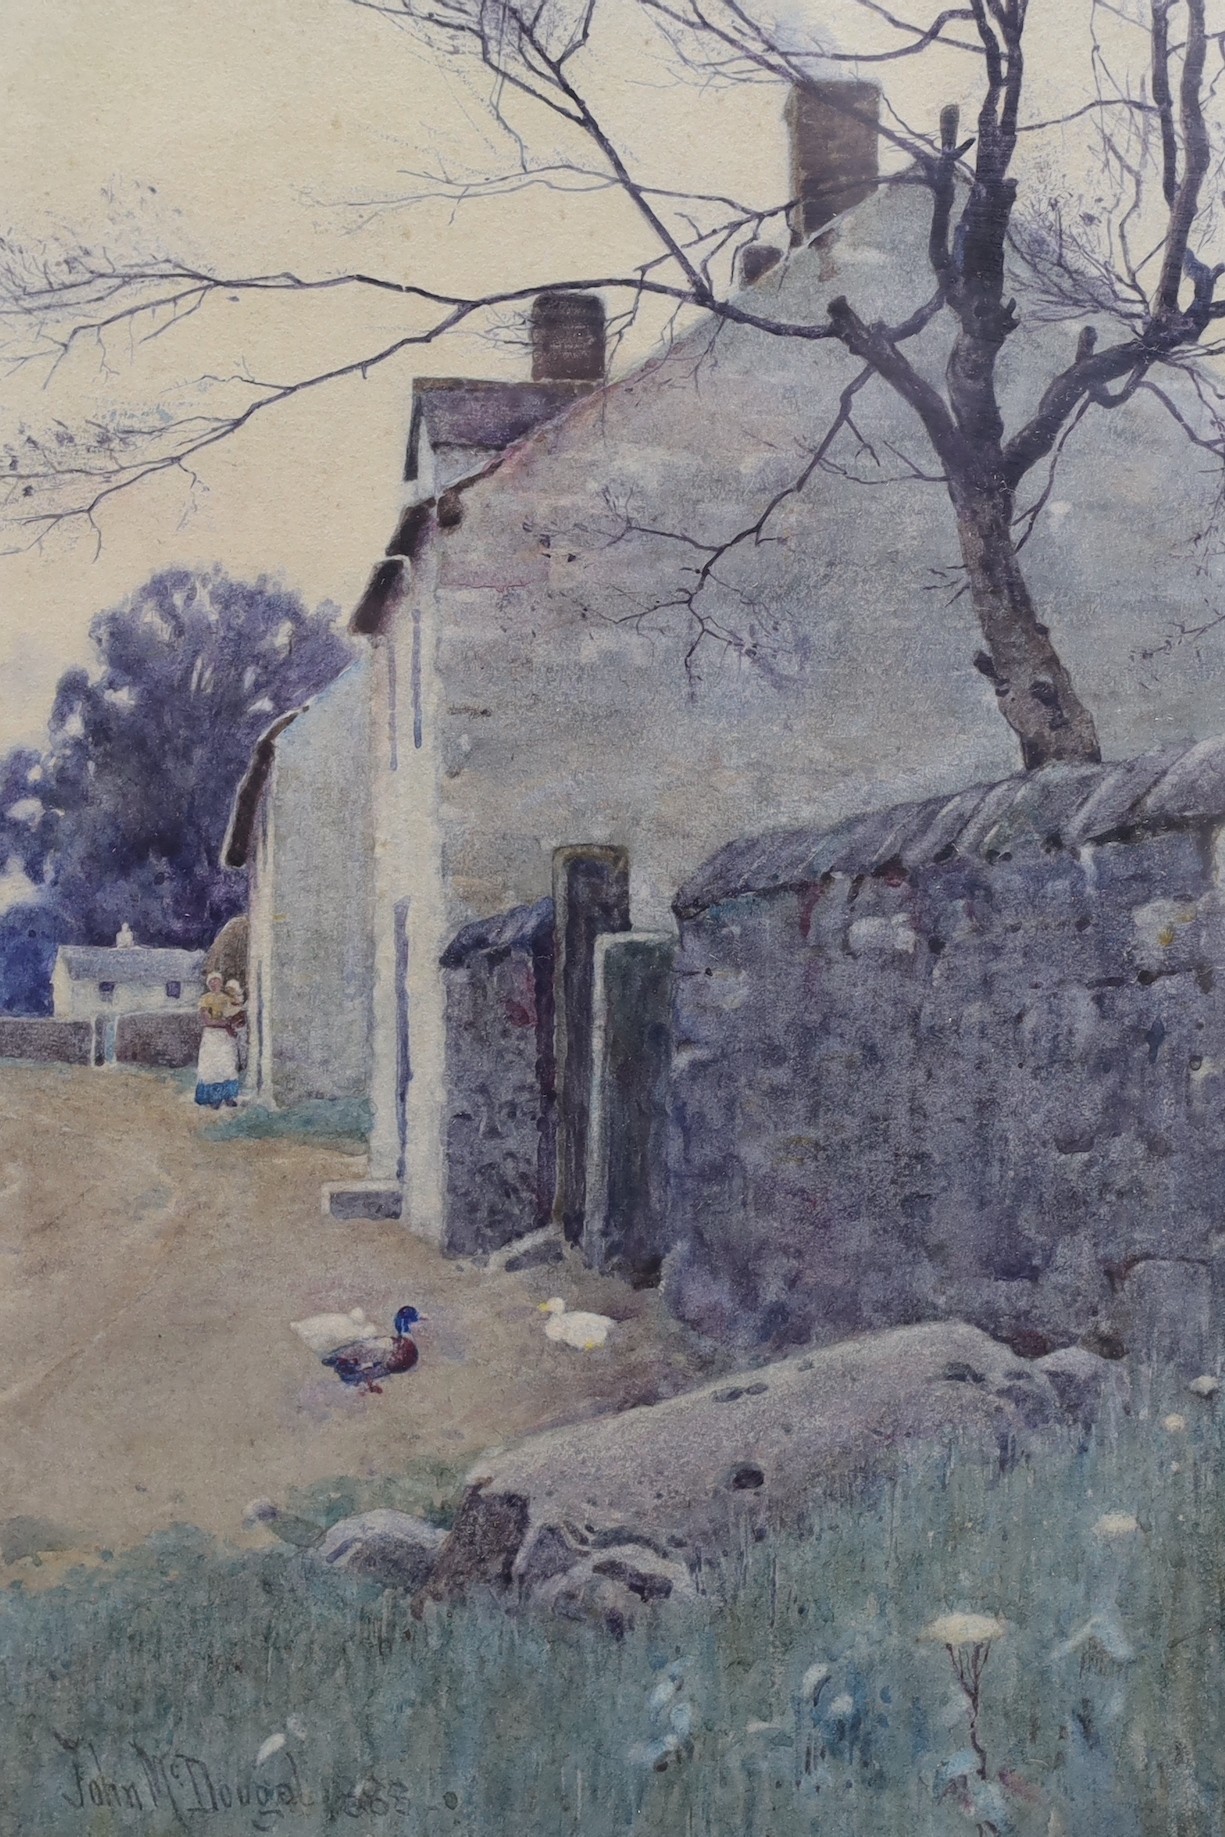 John McDougal (1851-1945), watercolour, Ducks beside cottages, signed and dated 1888, 24 x 16cm                                                                                                                             